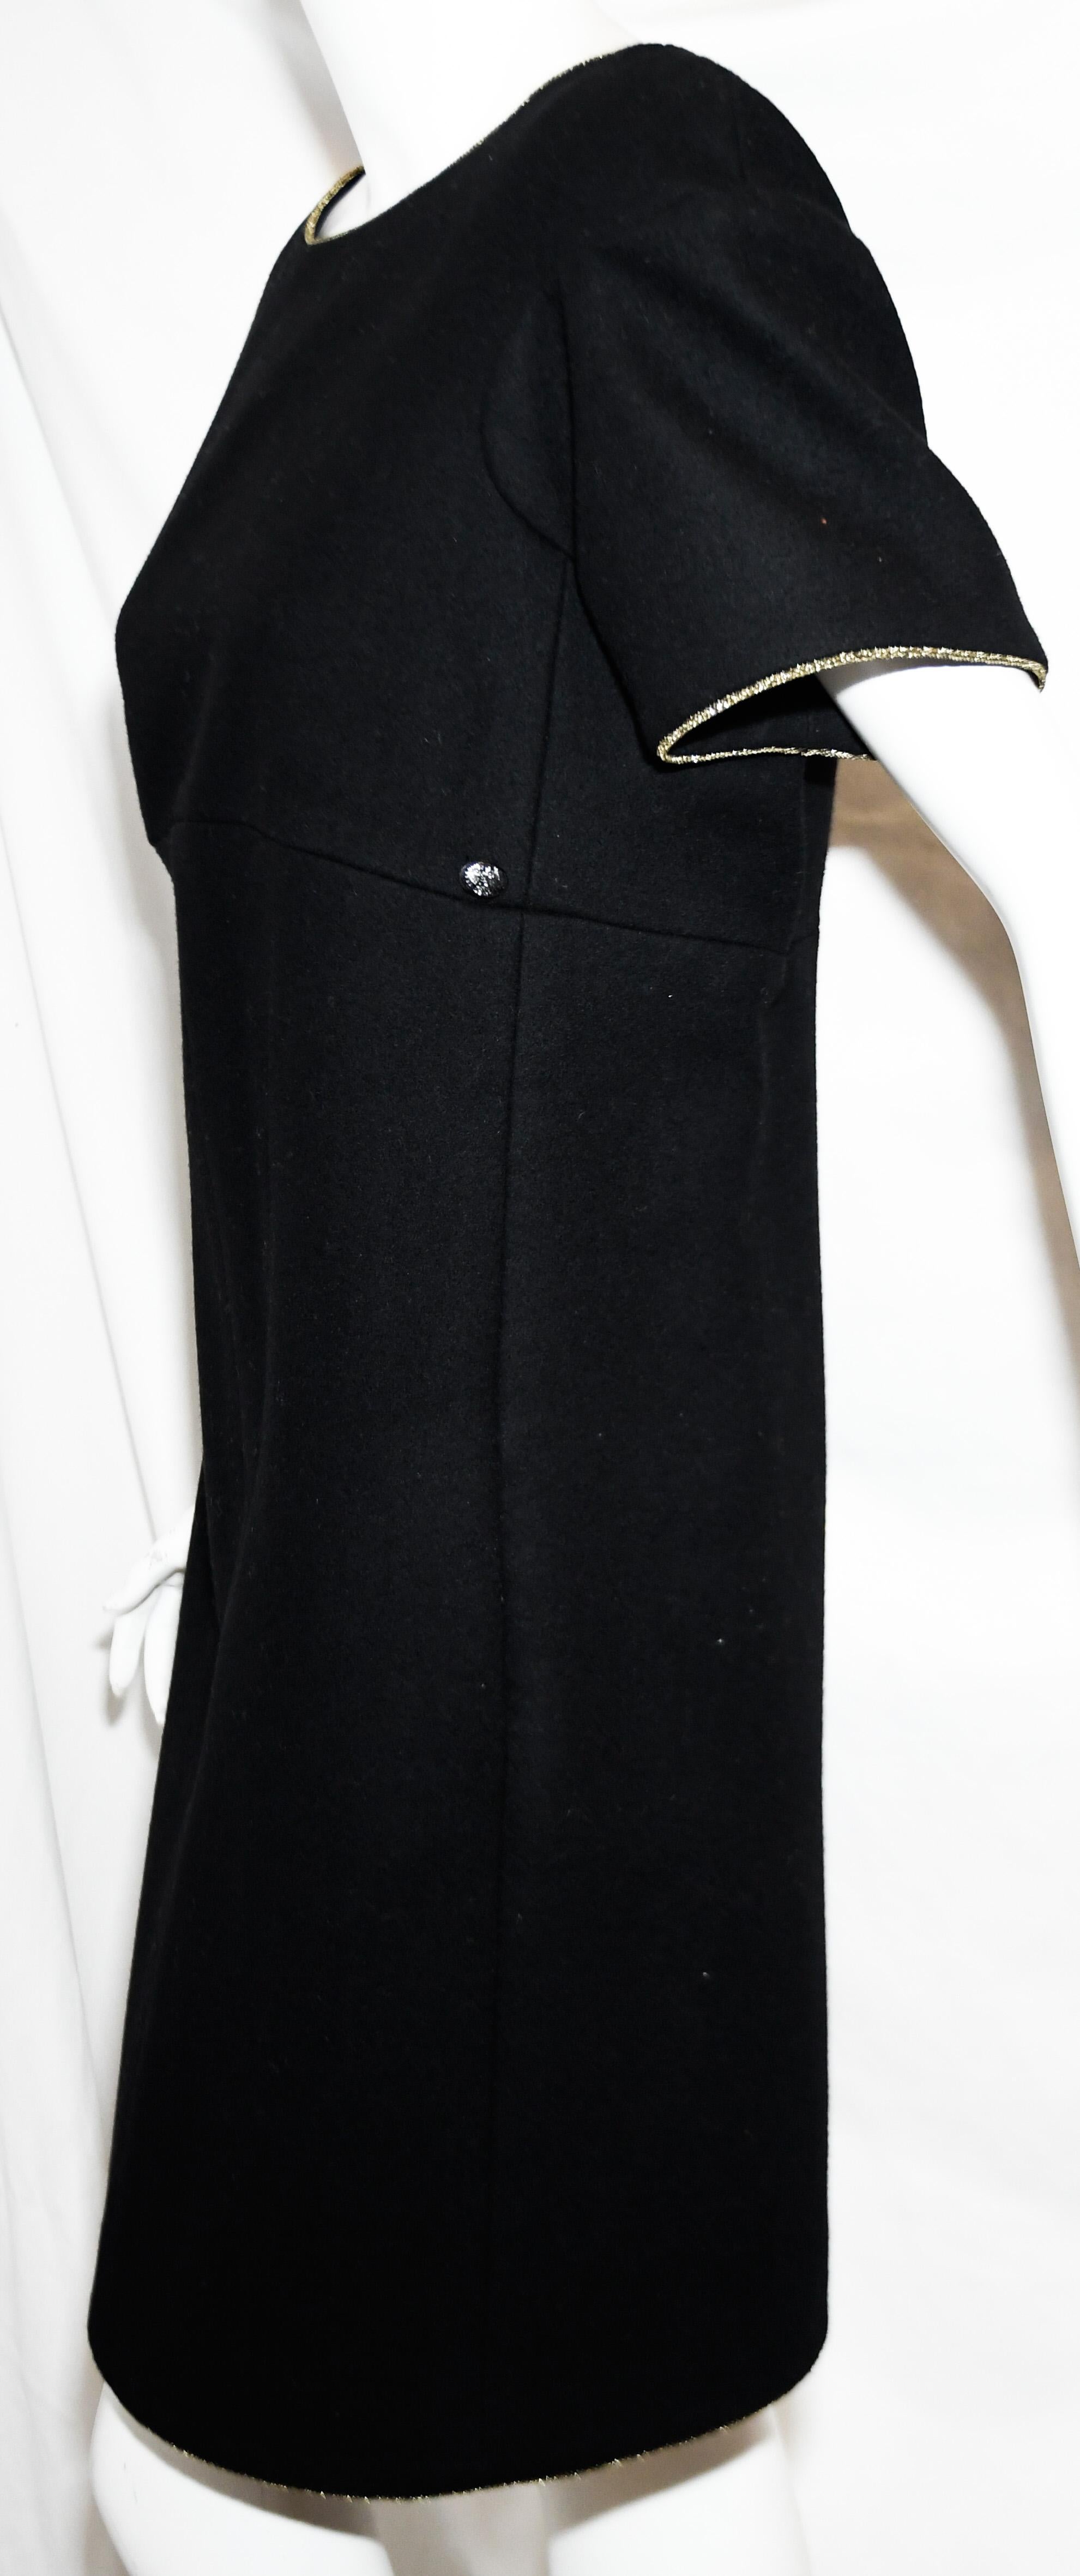 Chanel black wool A line dress is trimmed with gold tone cord around neckline and sleeve.   Dress has 3 plaquettes accentuating the front  of the dress and at one side CC Chanel button for decoration.  This dress is lined in black Camellia silk